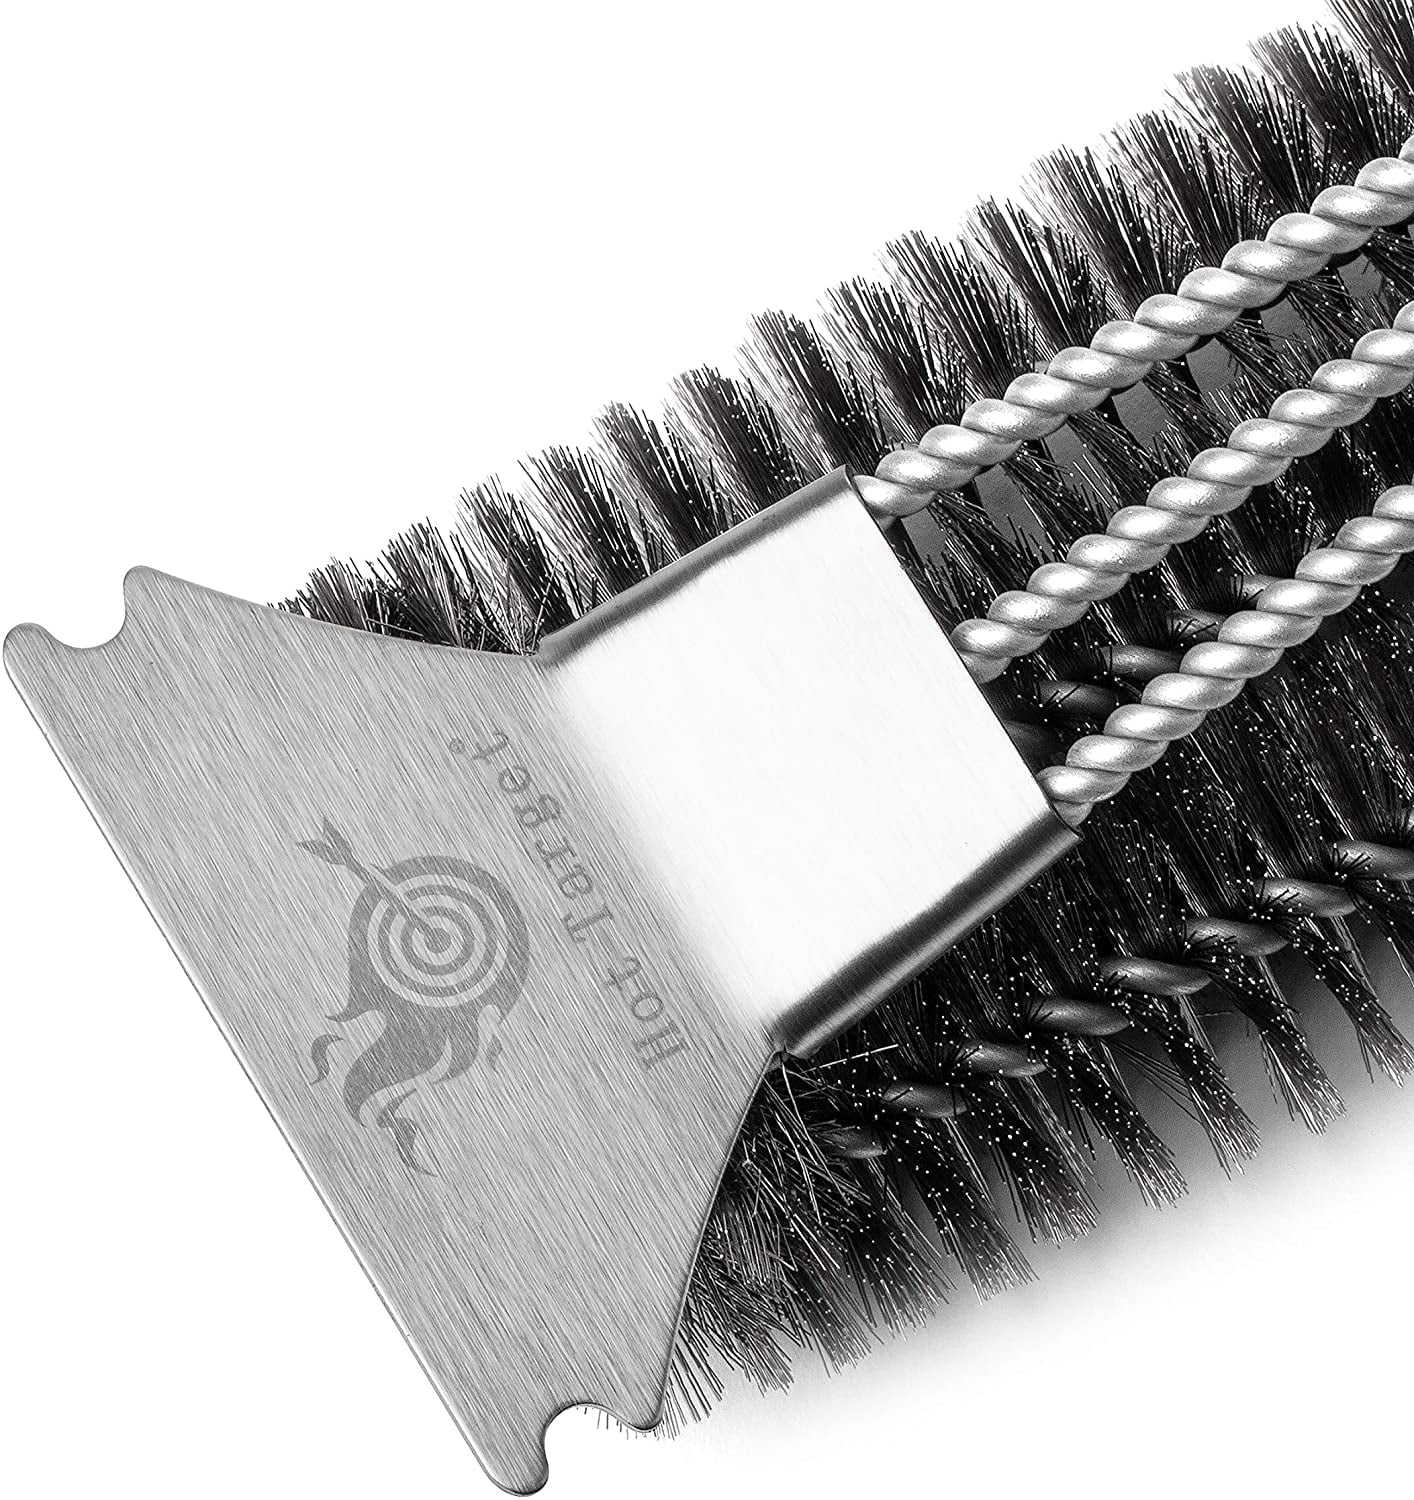 GrillPro 18.3 In. Steel Coil Spring Grill Cleaning Brush with Replacement  Head - McCabe Do it Center